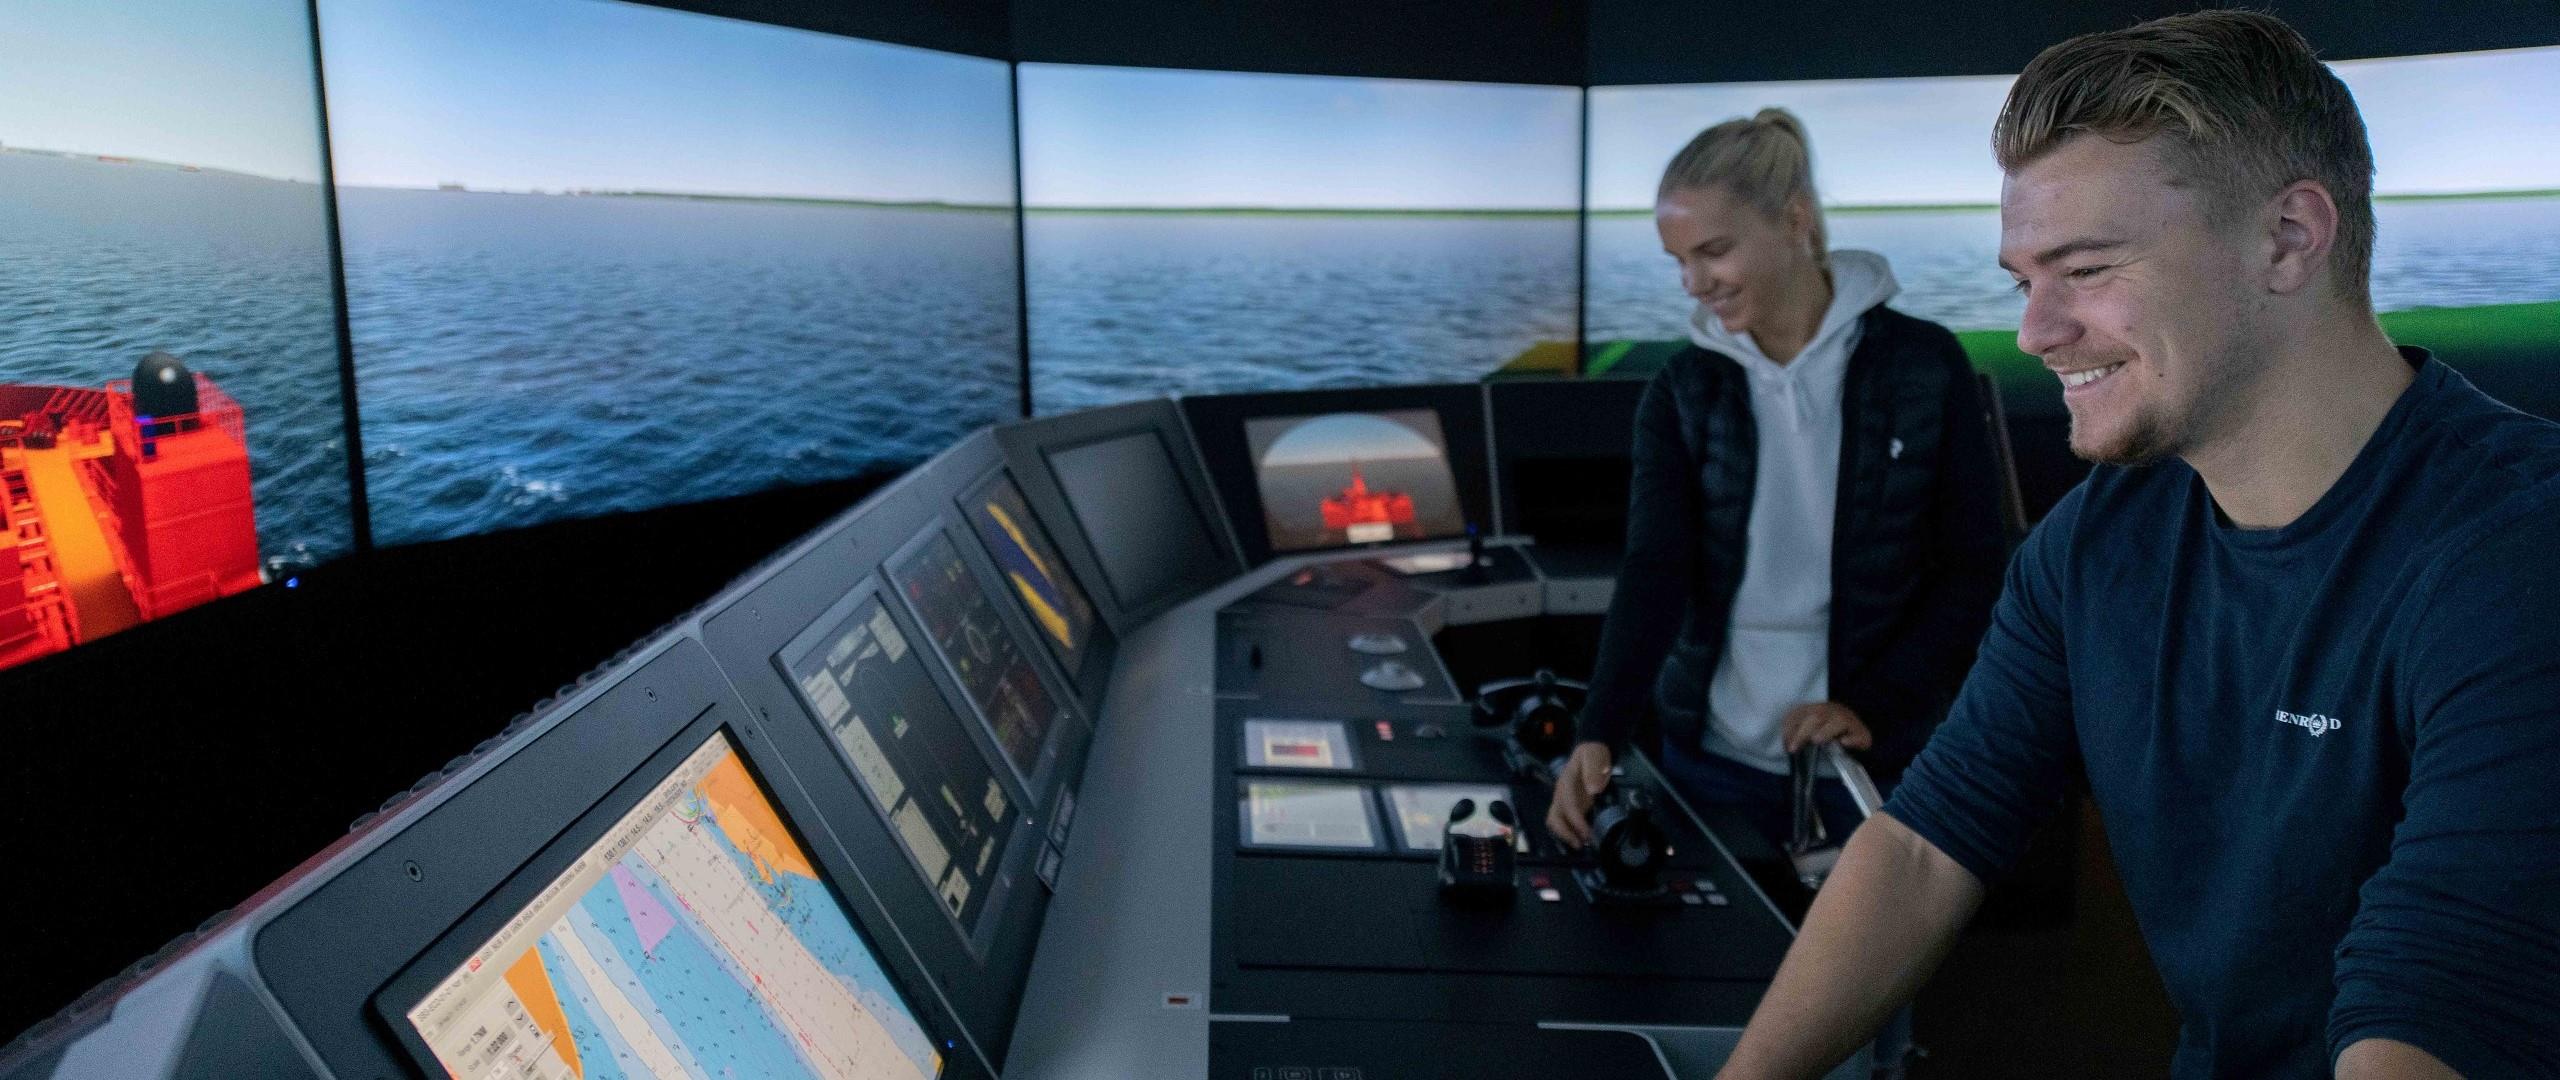 Students test out what it's like to be a coxswain at sea